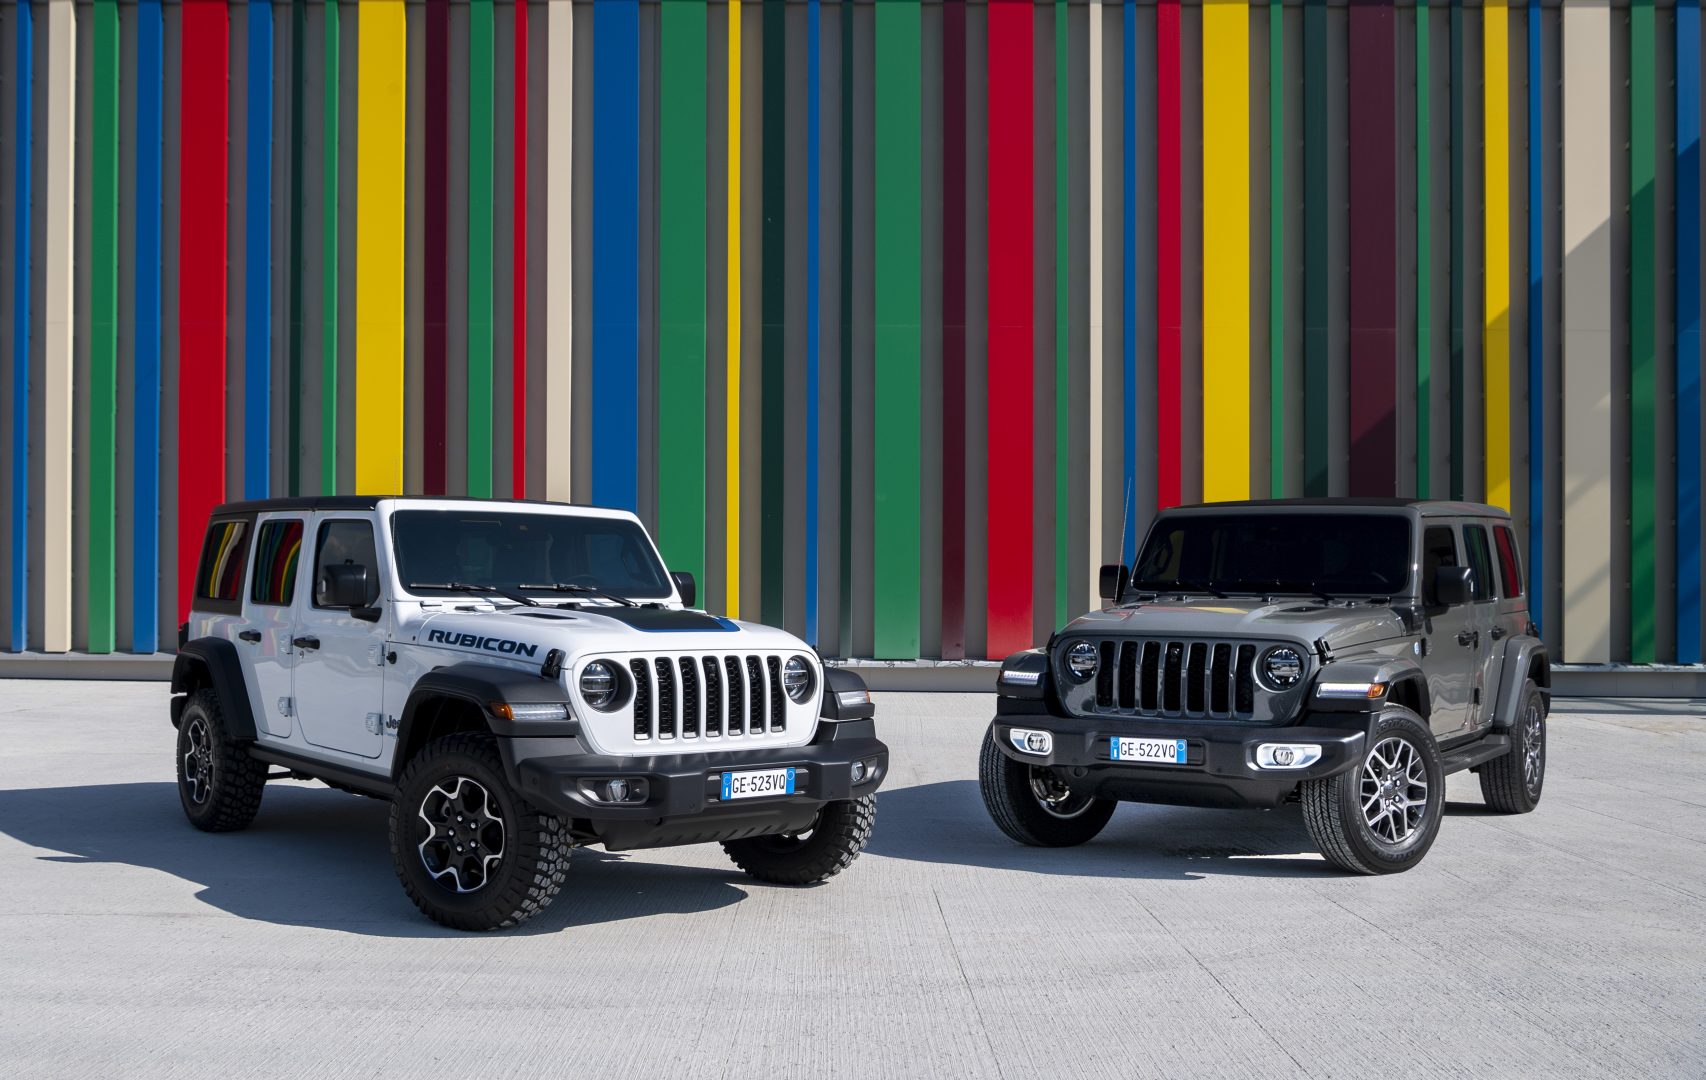 The Jeep Wrangler Unlimited Rubicon attracts women with its vibrant colors